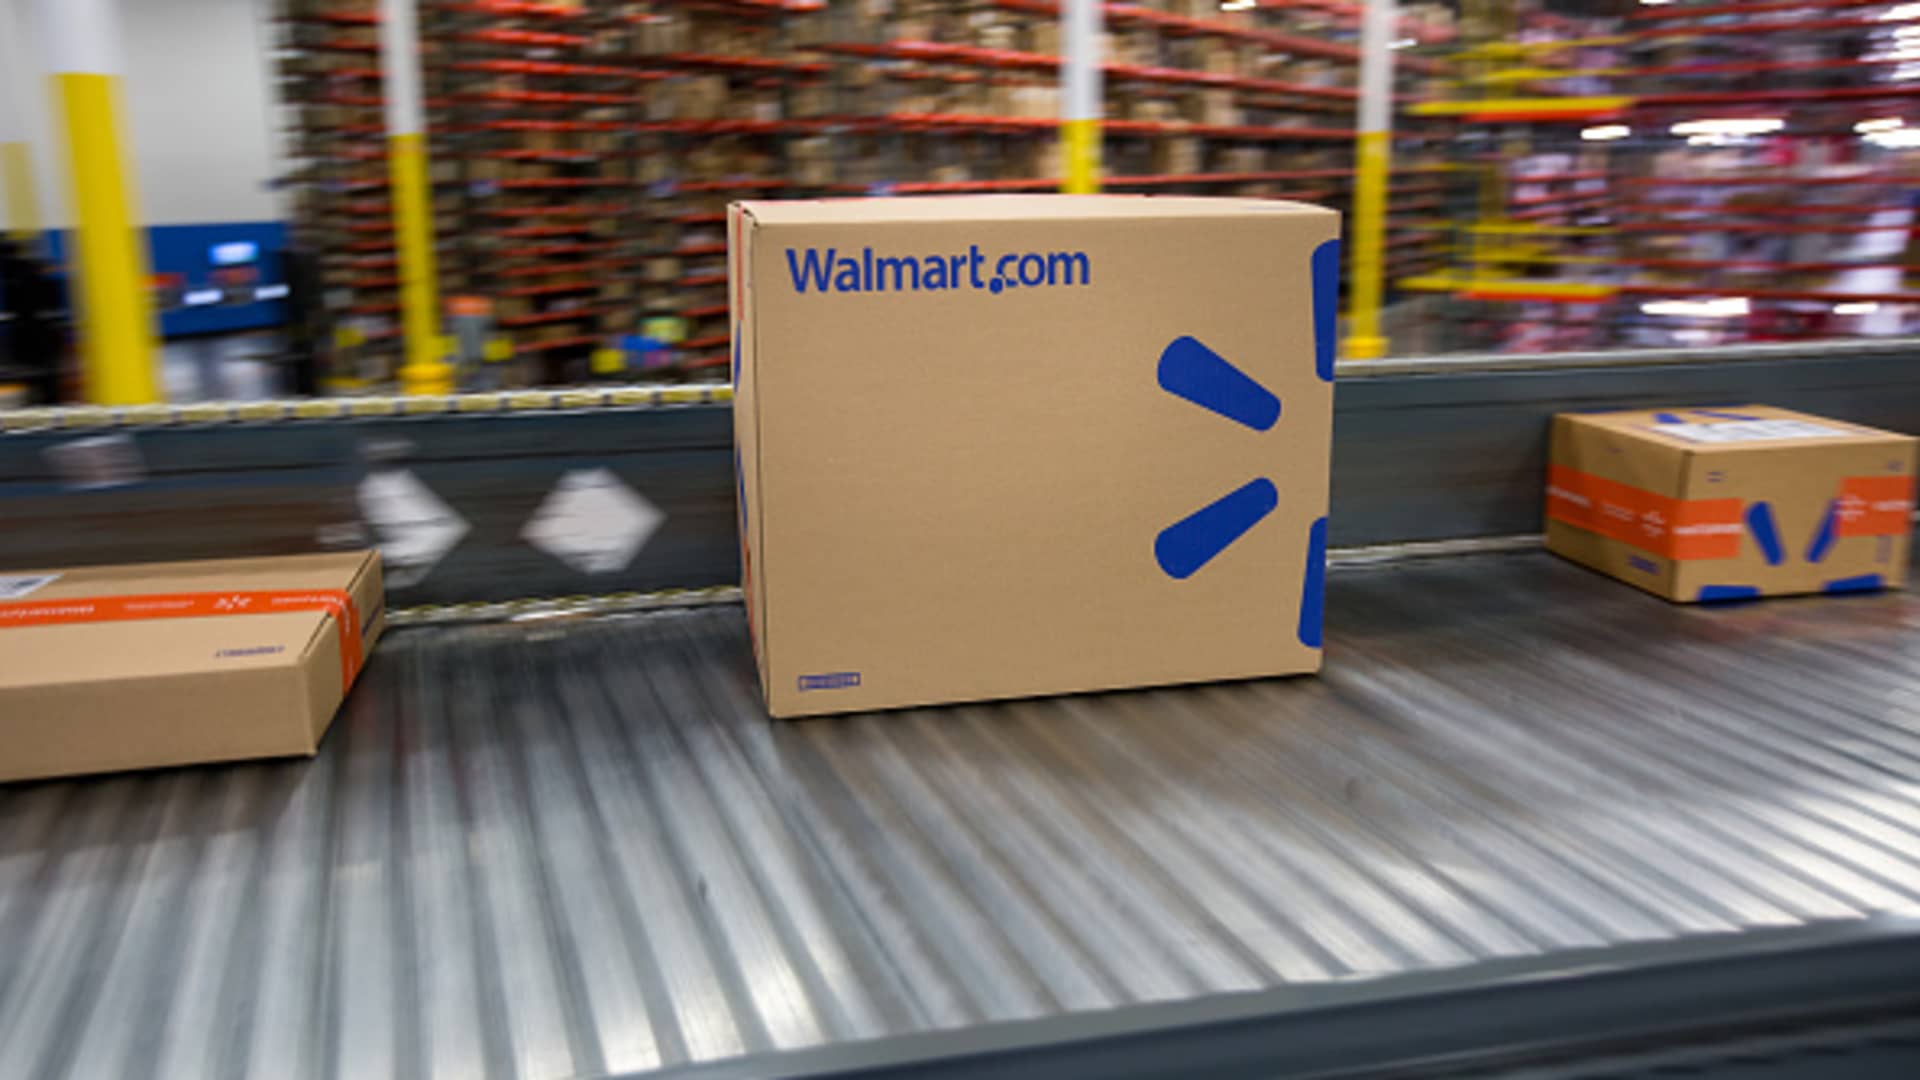 Walmart+? Membership Service to Launch in Attempt to Compete With